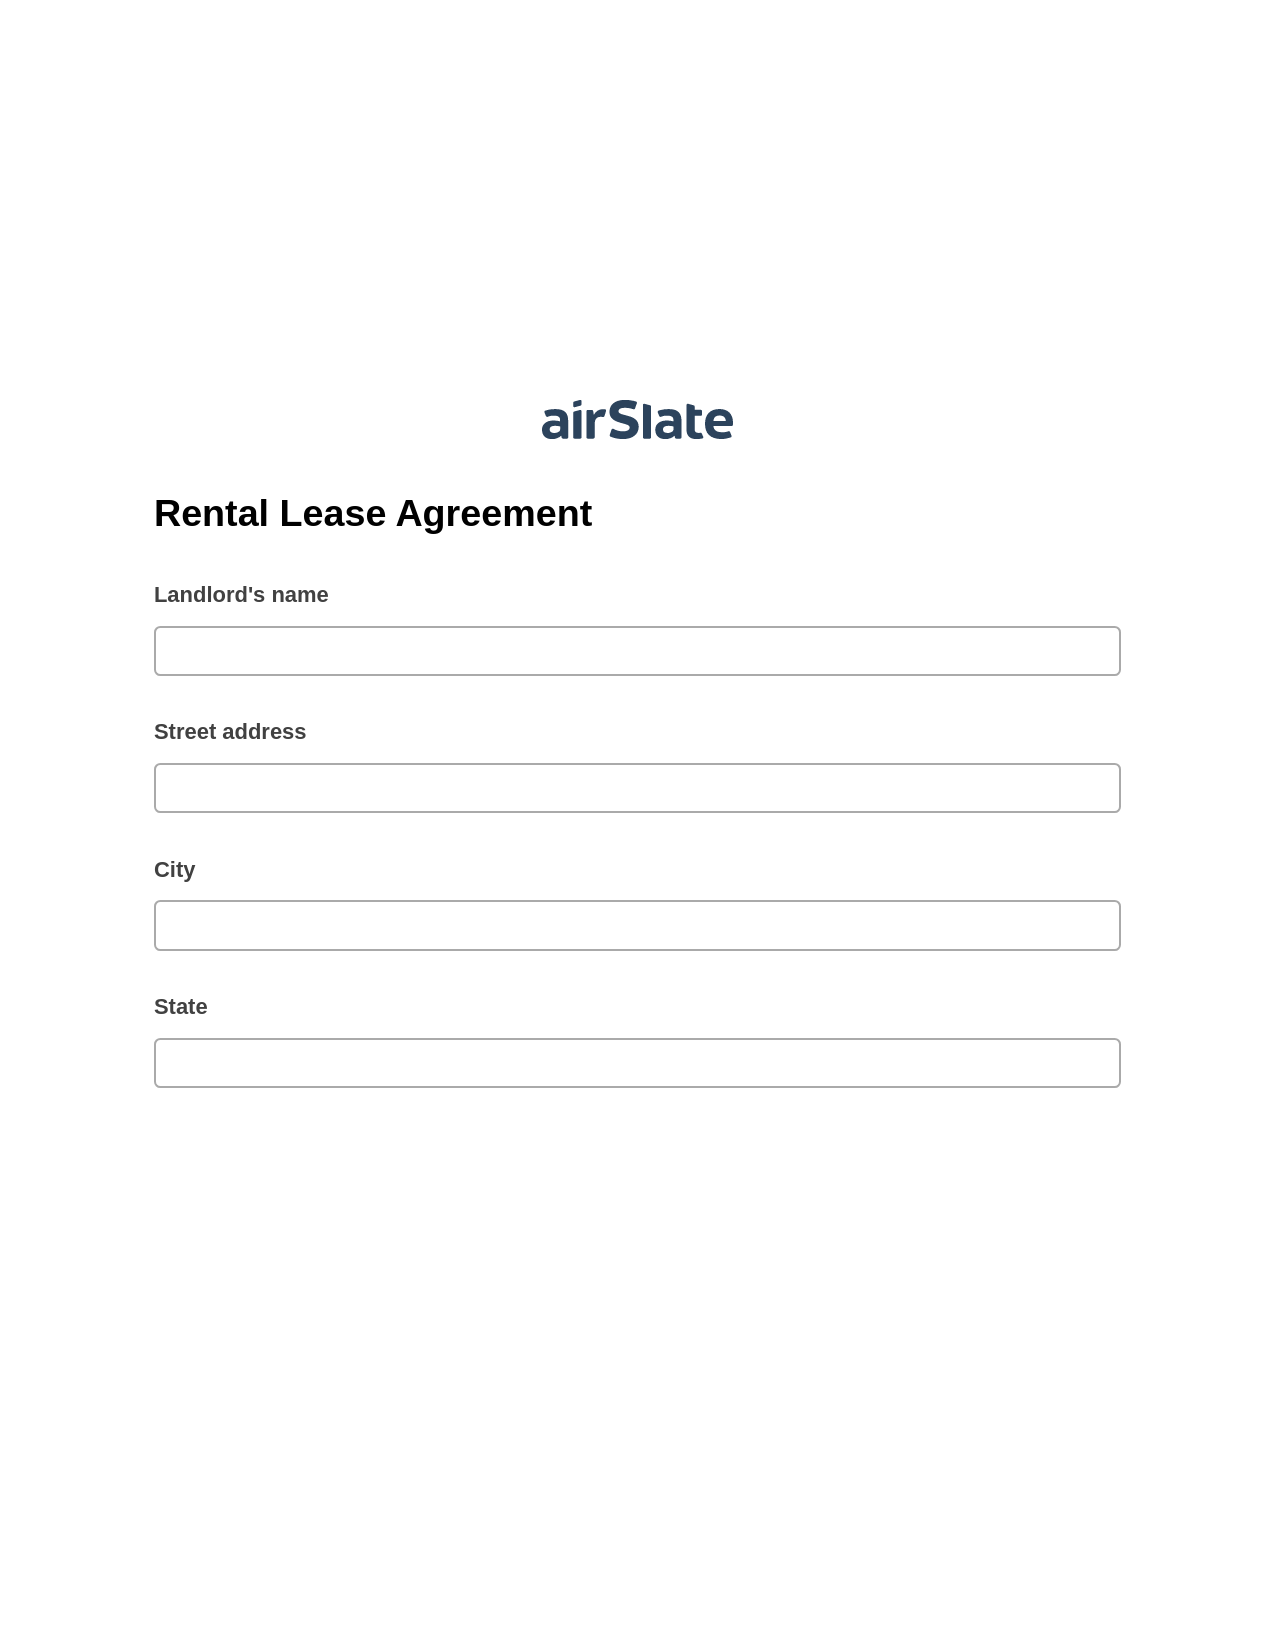 Rental Lease Agreement Pre-fill from Excel Spreadsheet Dropdown Options Bot, Remove Tags From Slate Bot, Export to Excel 365 Bot